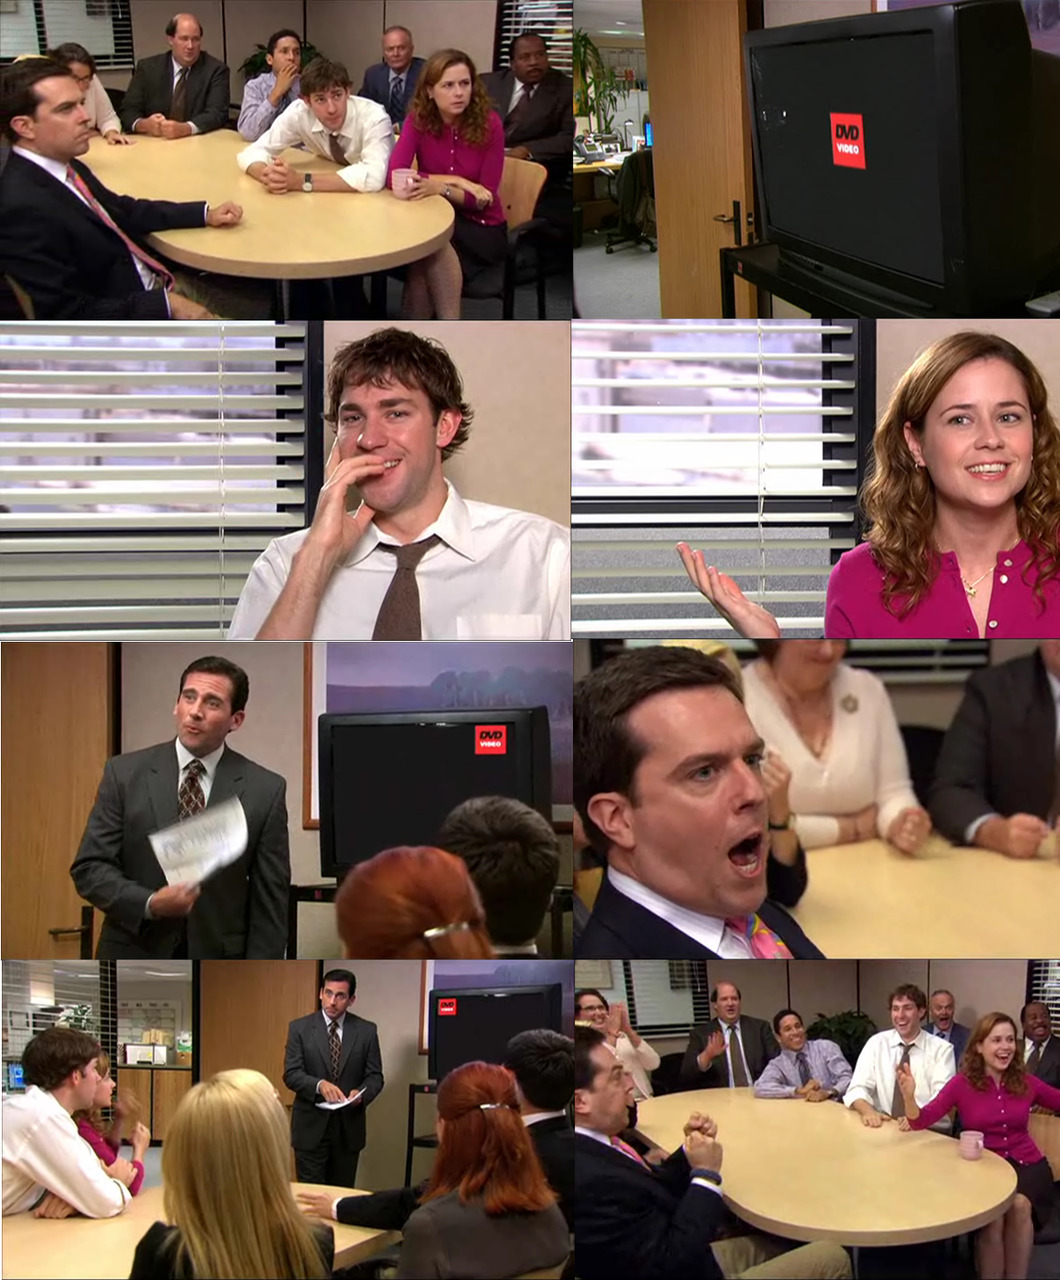 The Office. — Jim Halpert: There's this cube on the screen which...